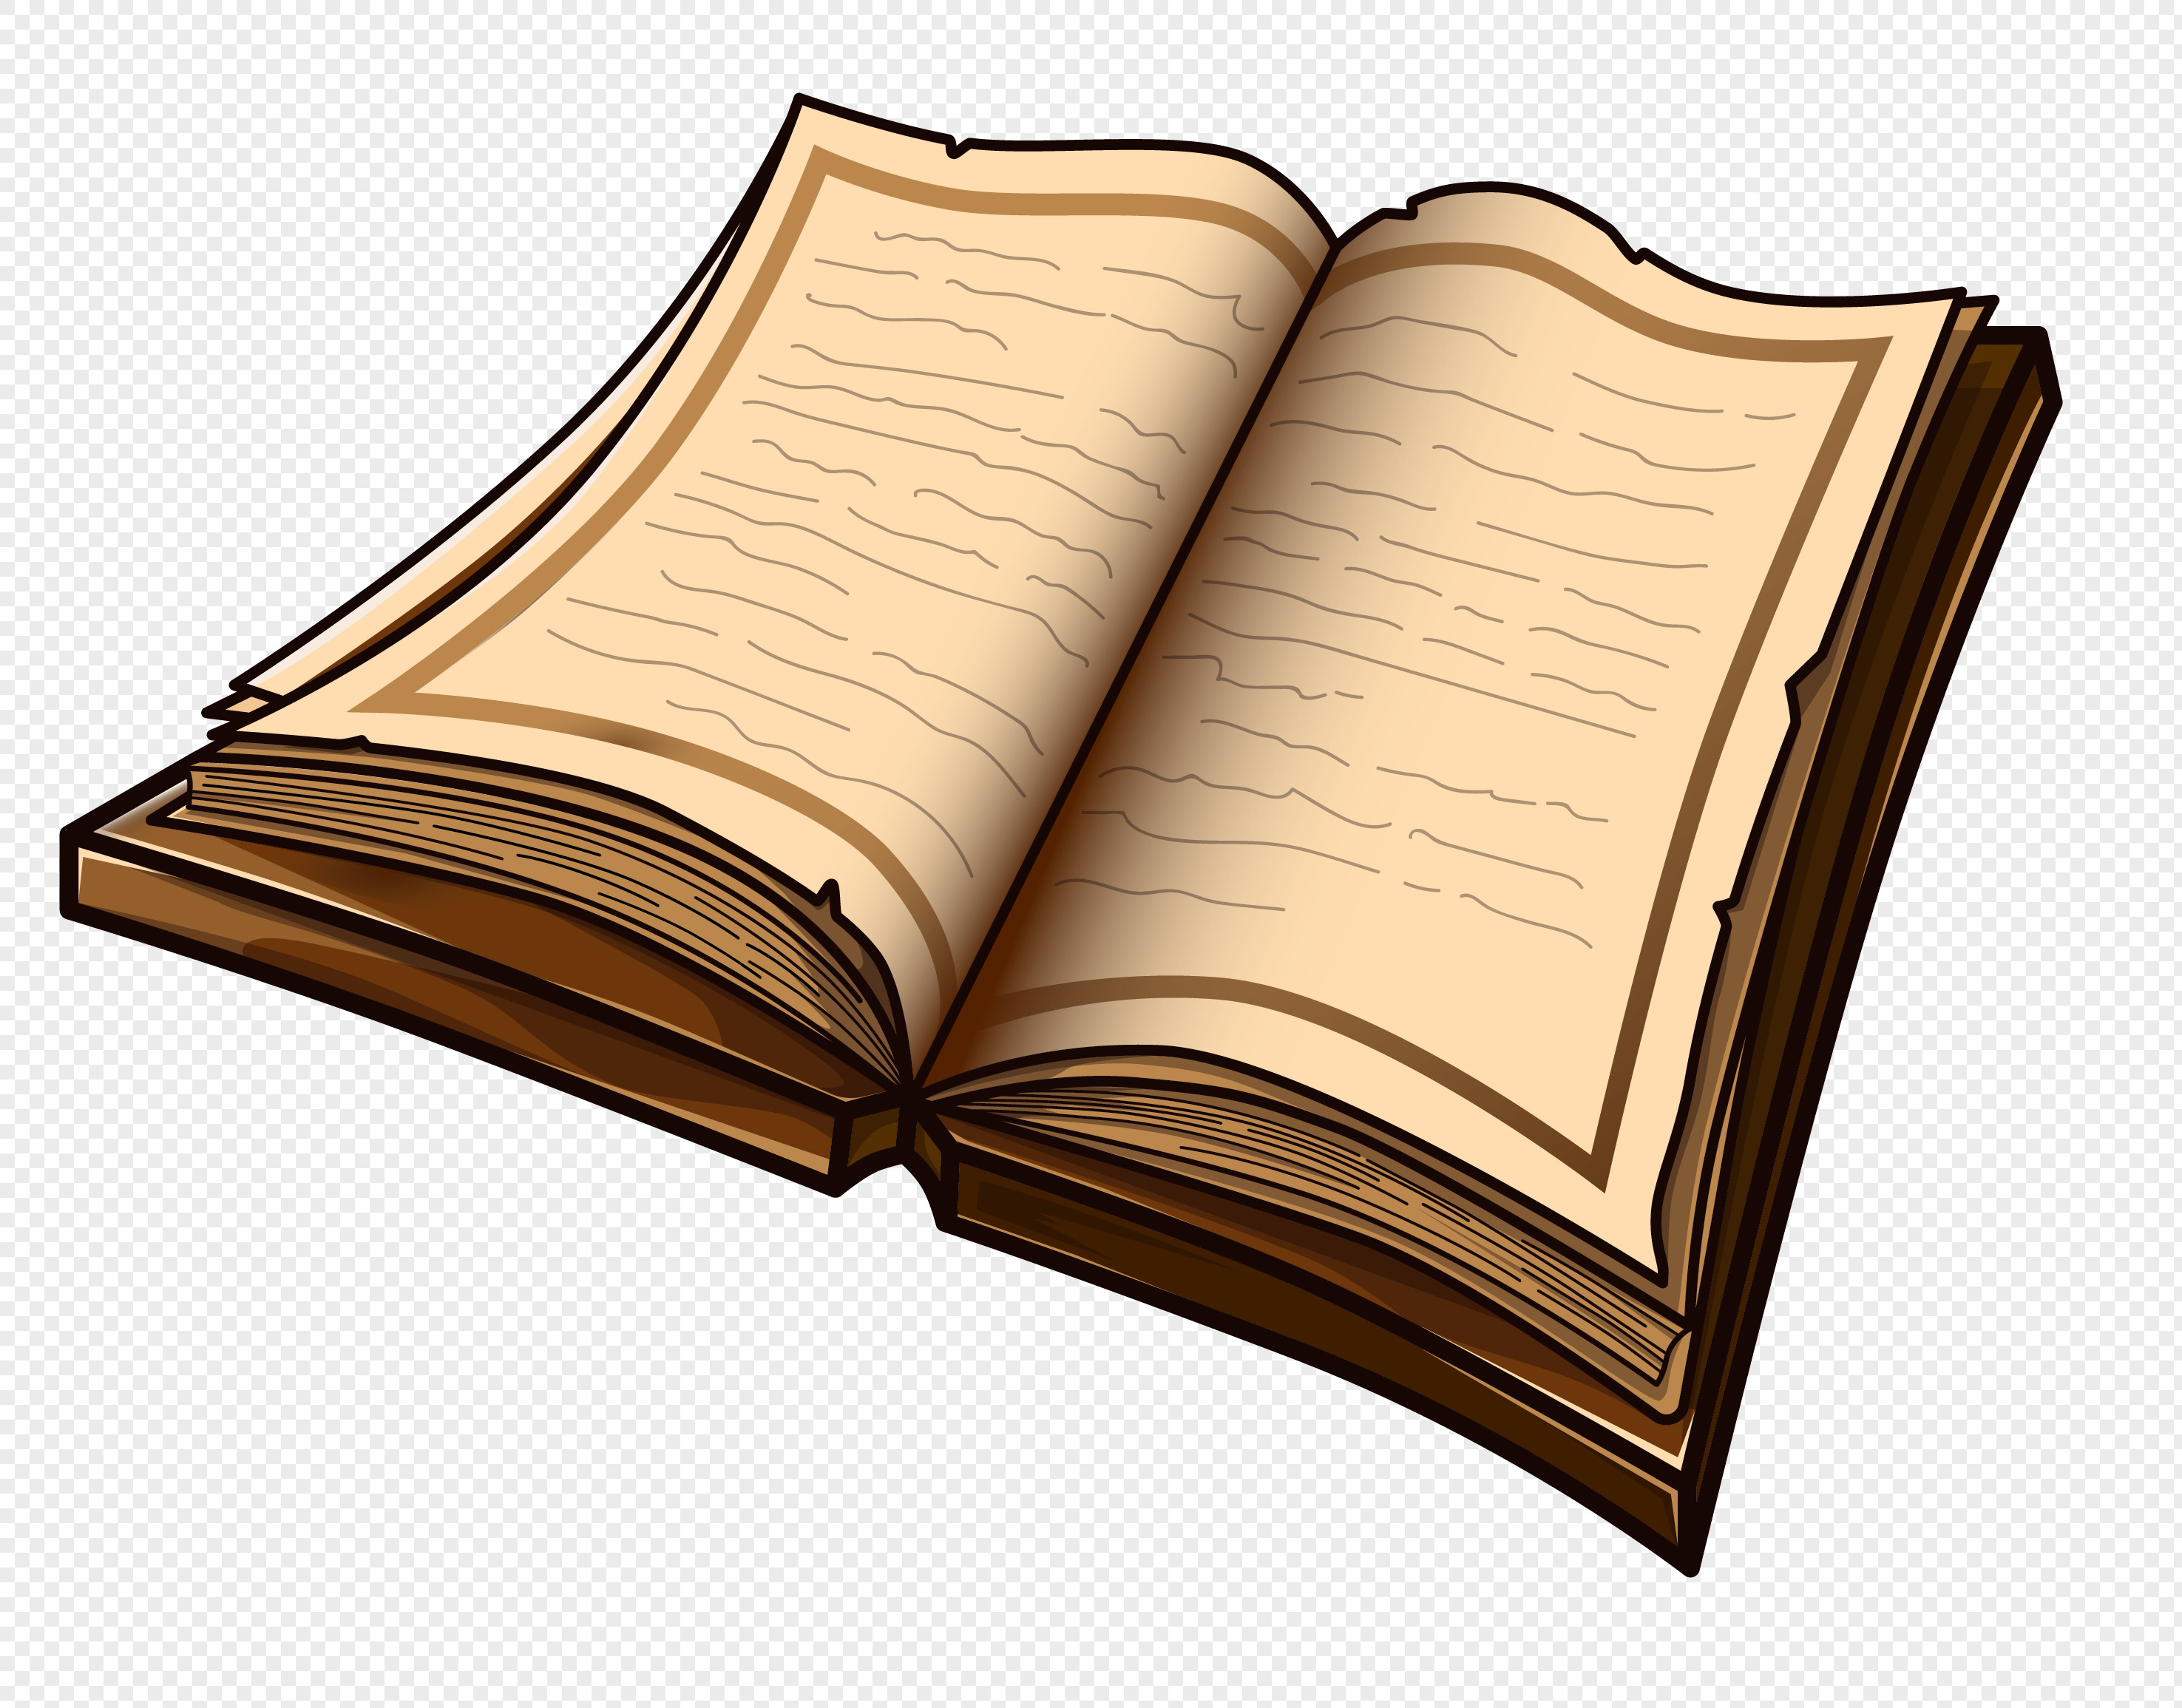 Book png image_picture free download